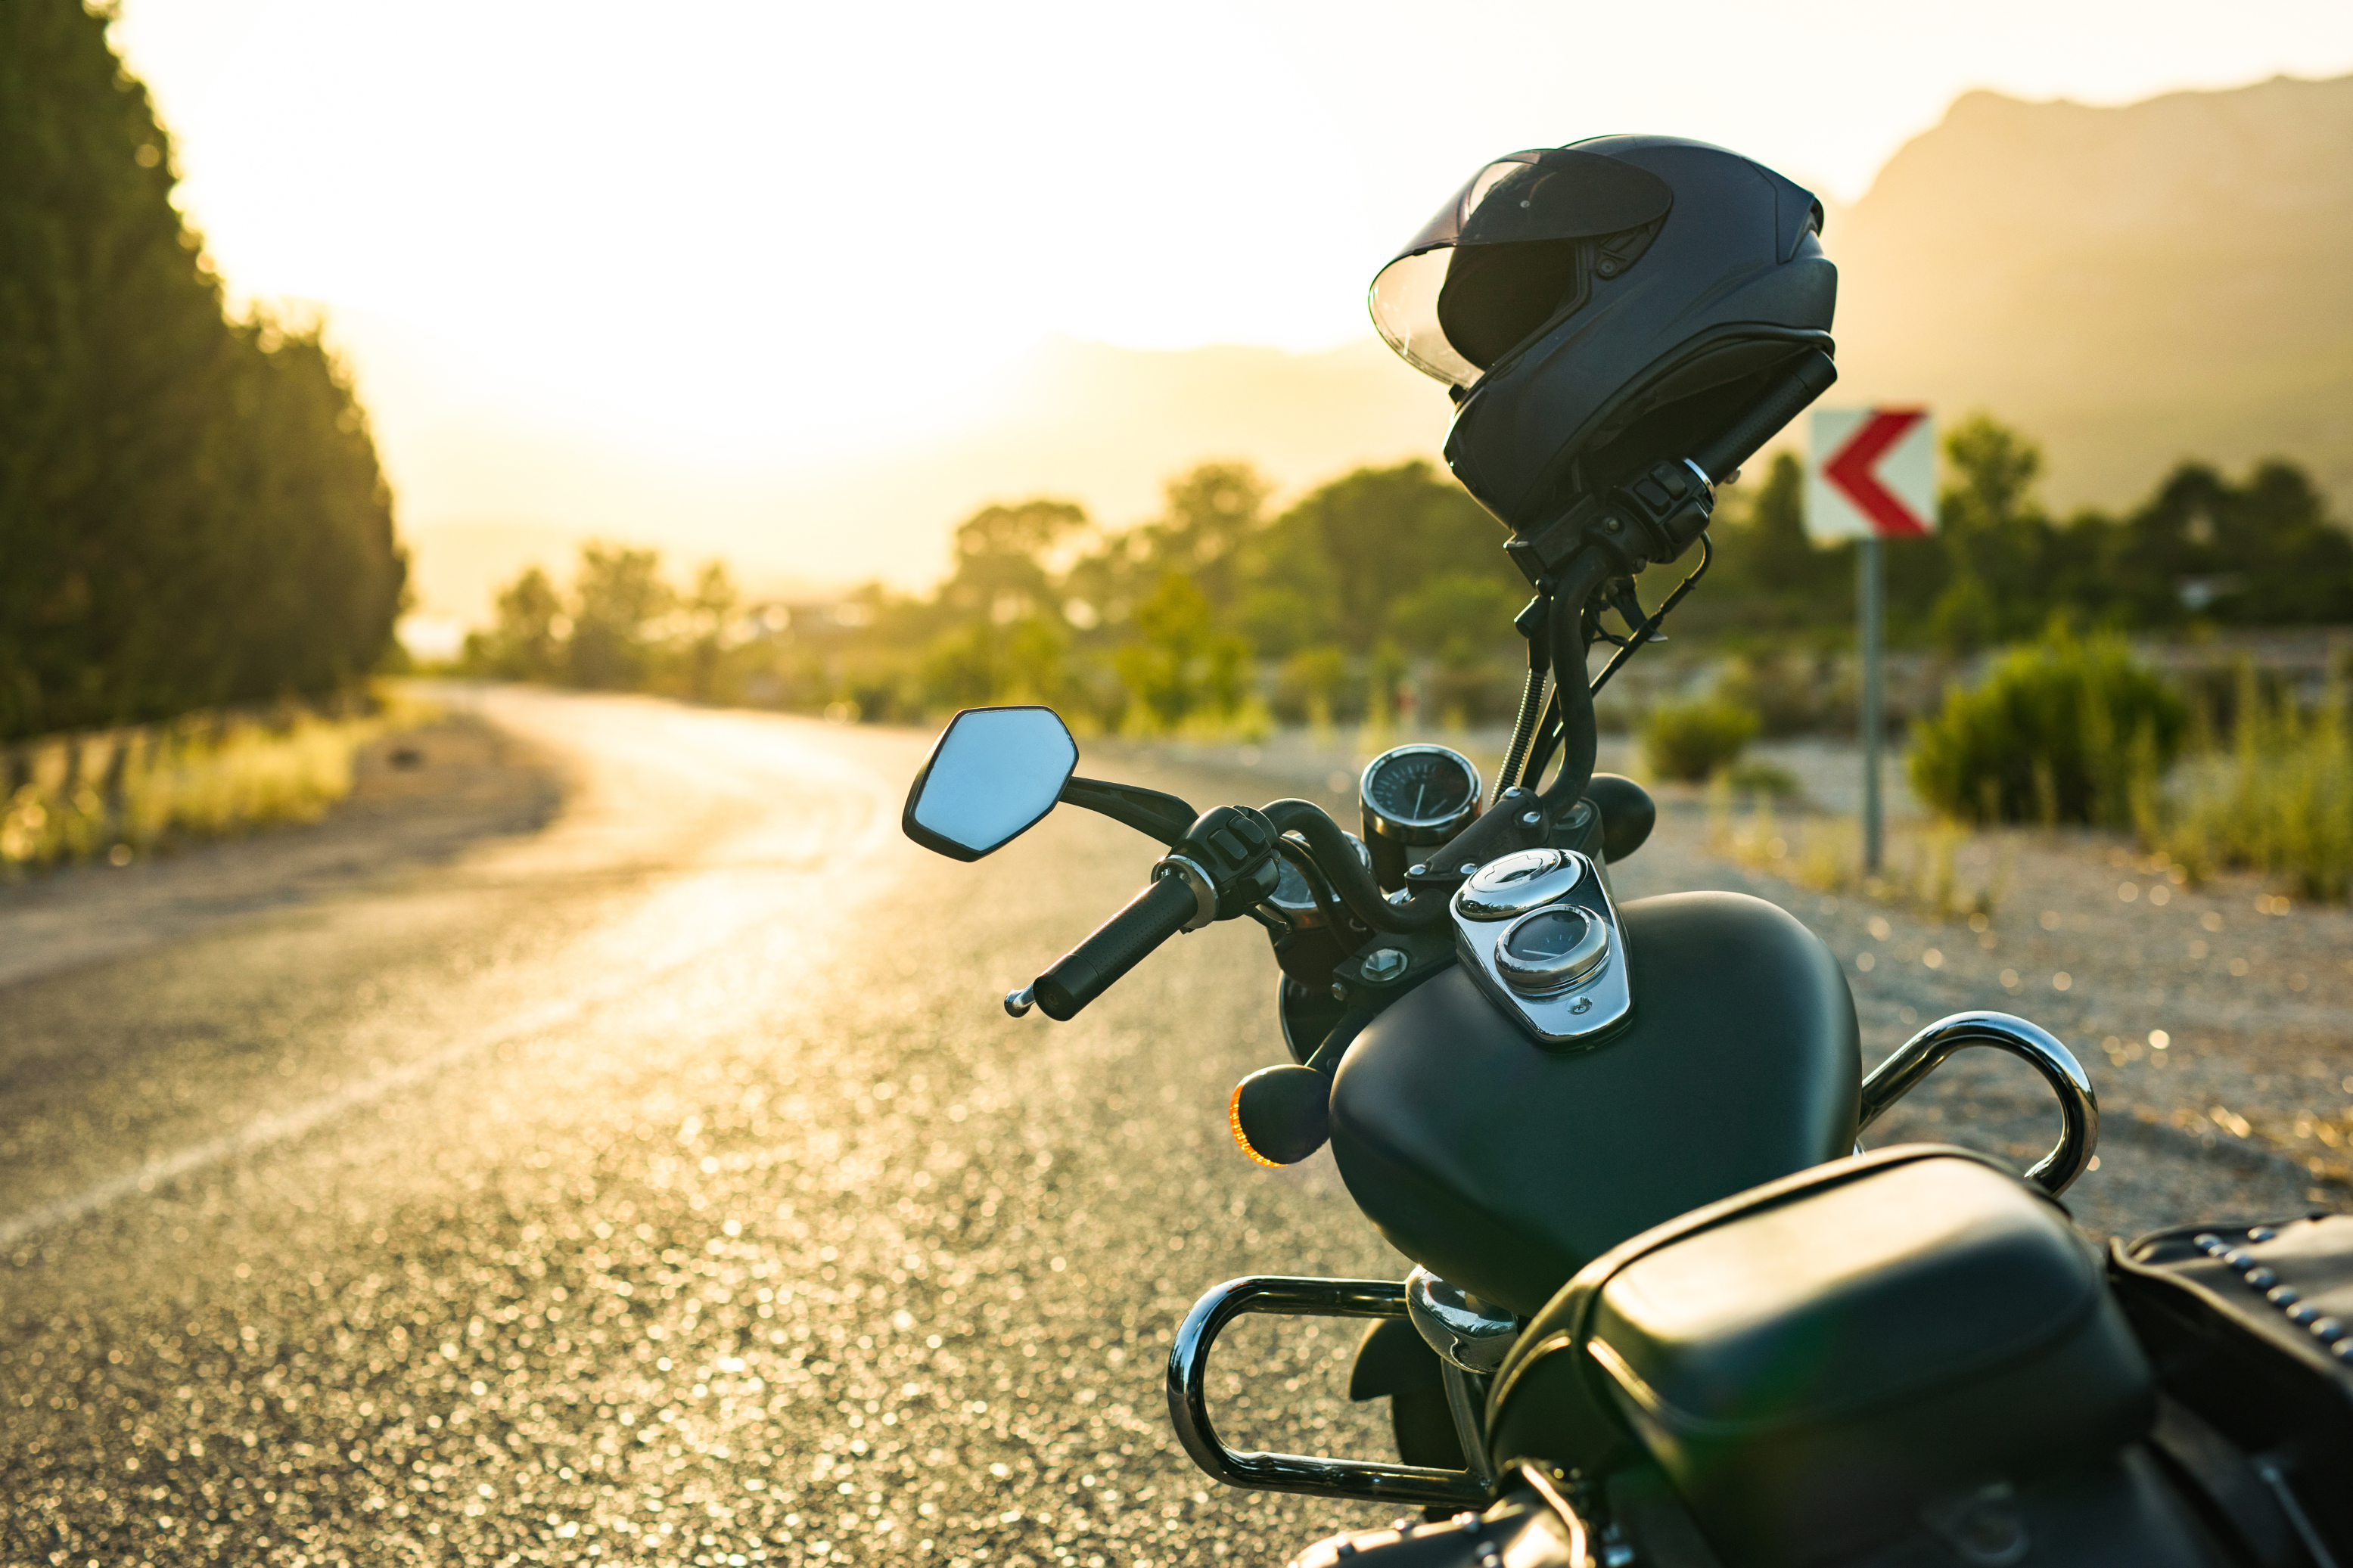 The Spirituality of Motorcycling